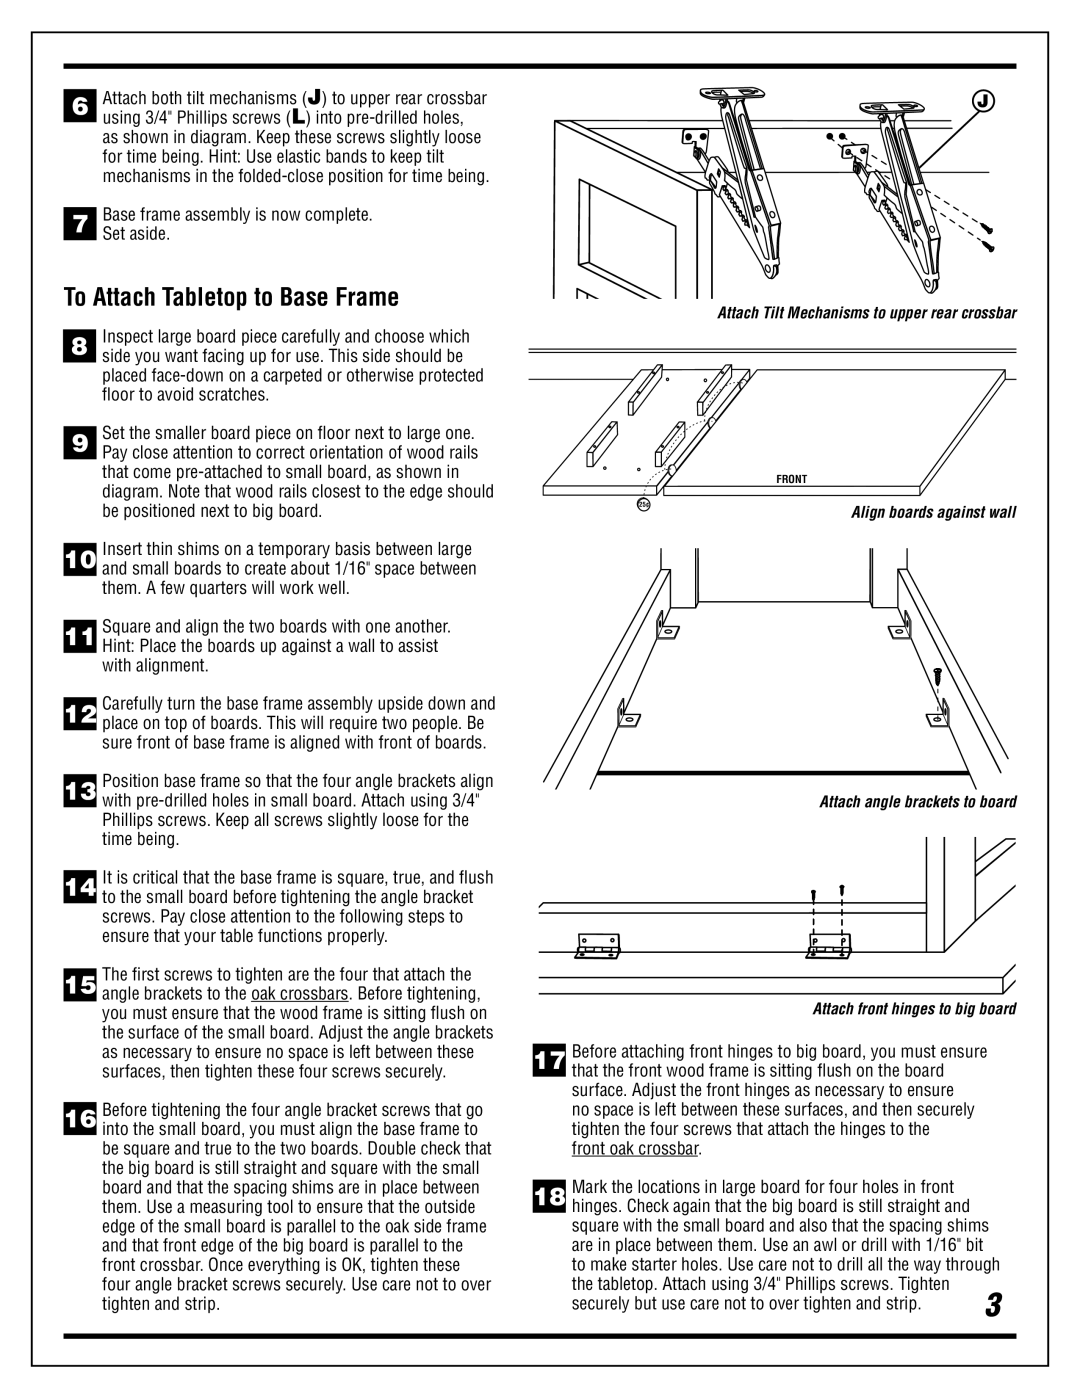 Alvin Titan II manual To Attach Tabletop to Base Frame 